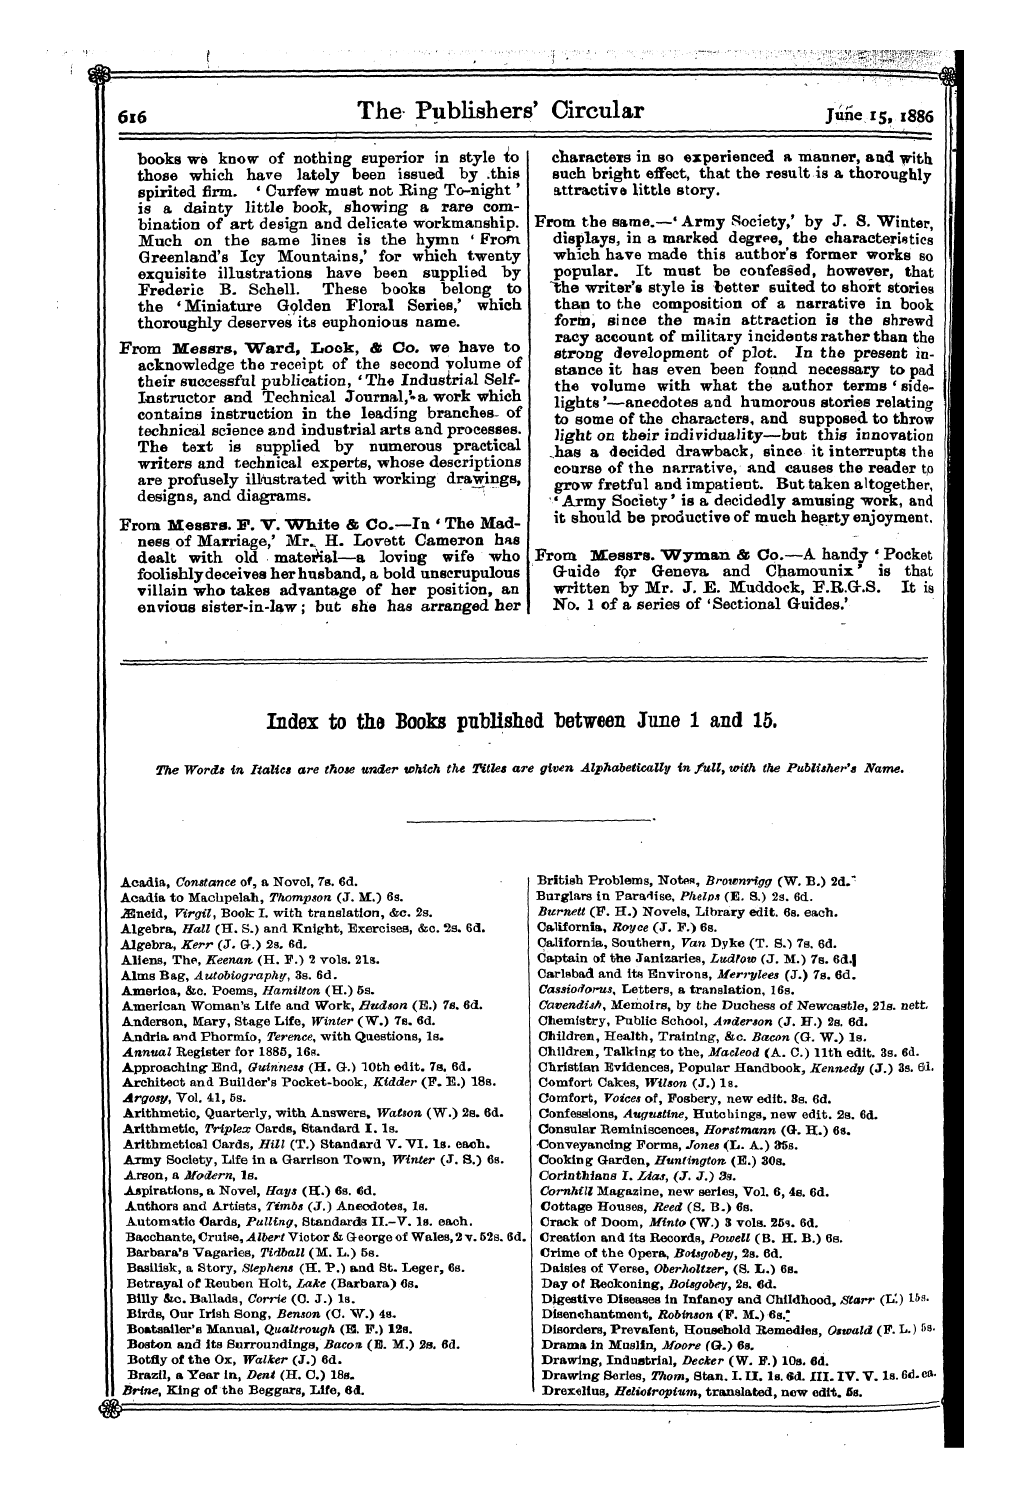 Publishers’ Circular (1880-1890): jS F Y, 1st edition - Index To The Books Published Between June 1 And 15. I The Words In Italics Are Those Under Which The Titles Are Given Alphabetically In Full, With The Publisher's Name, H